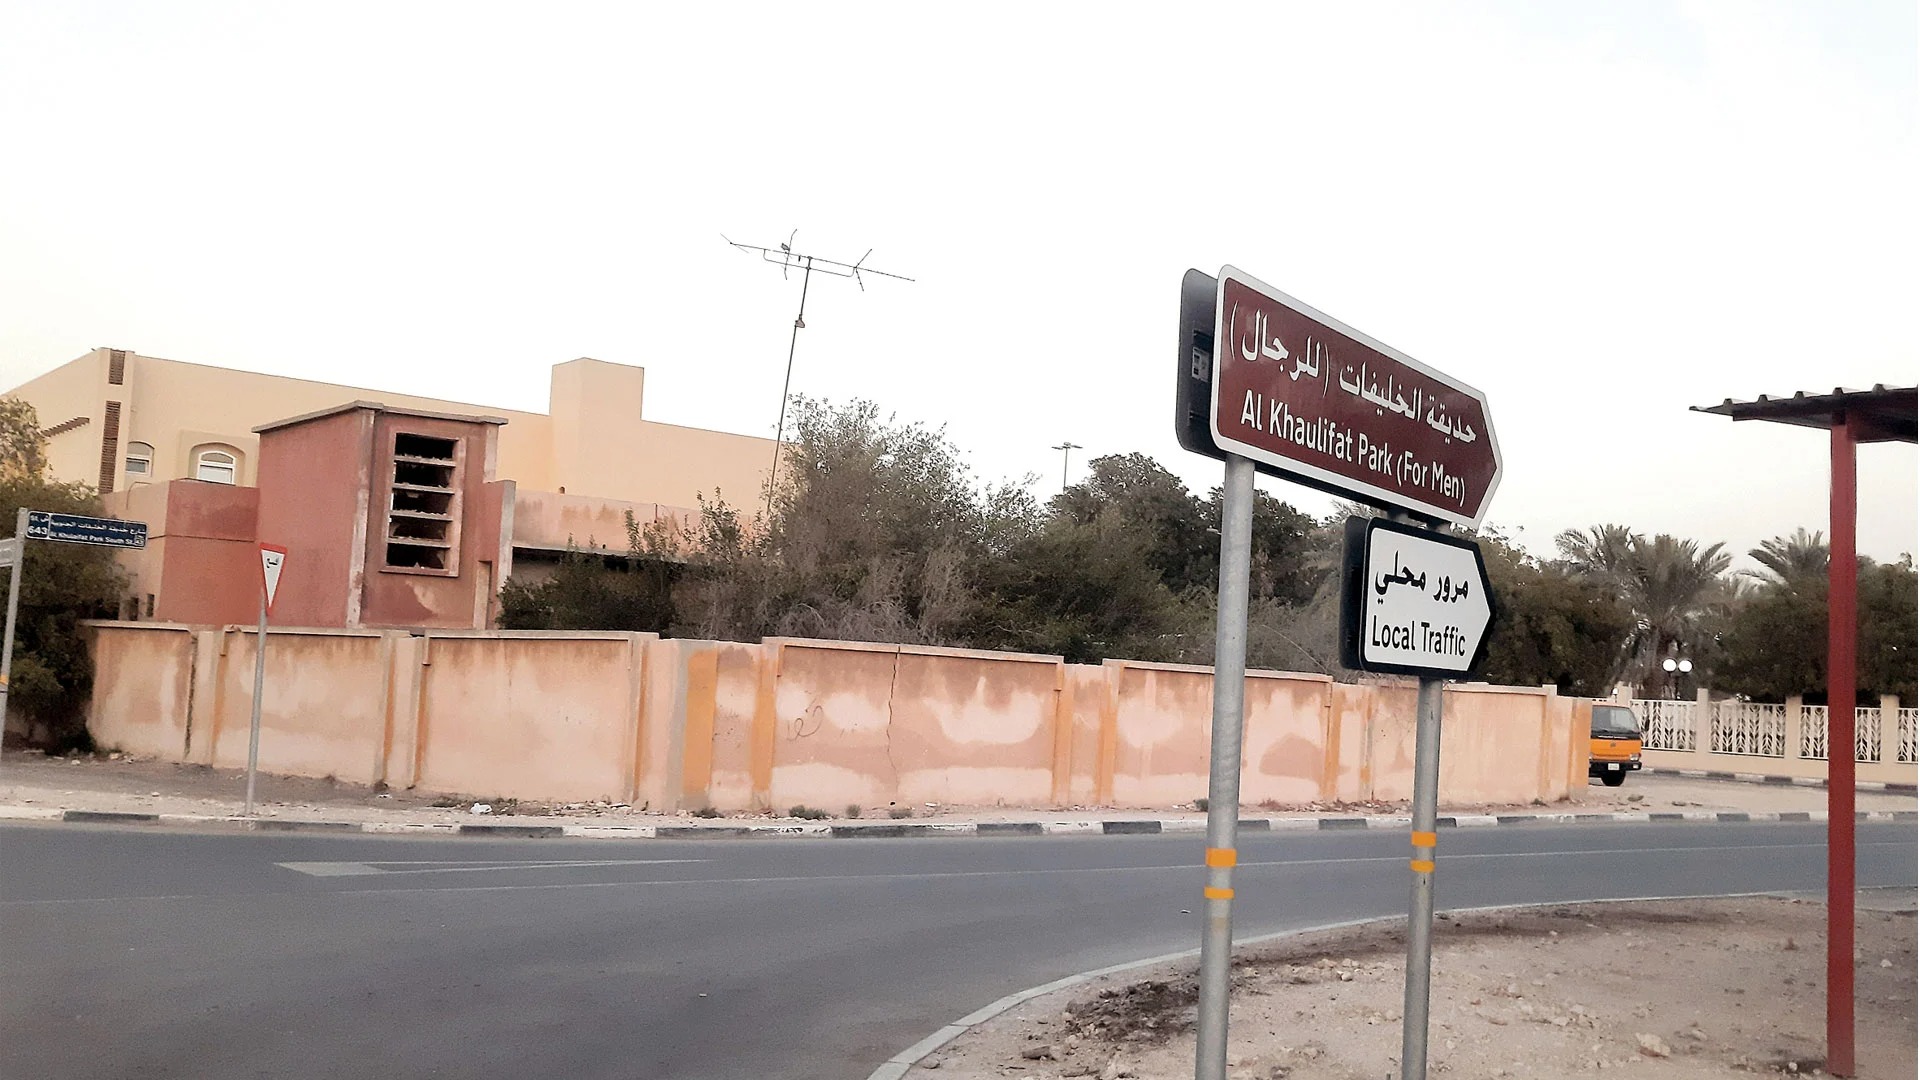 According to road signs, Al-Khulaifat Park is "for men only"